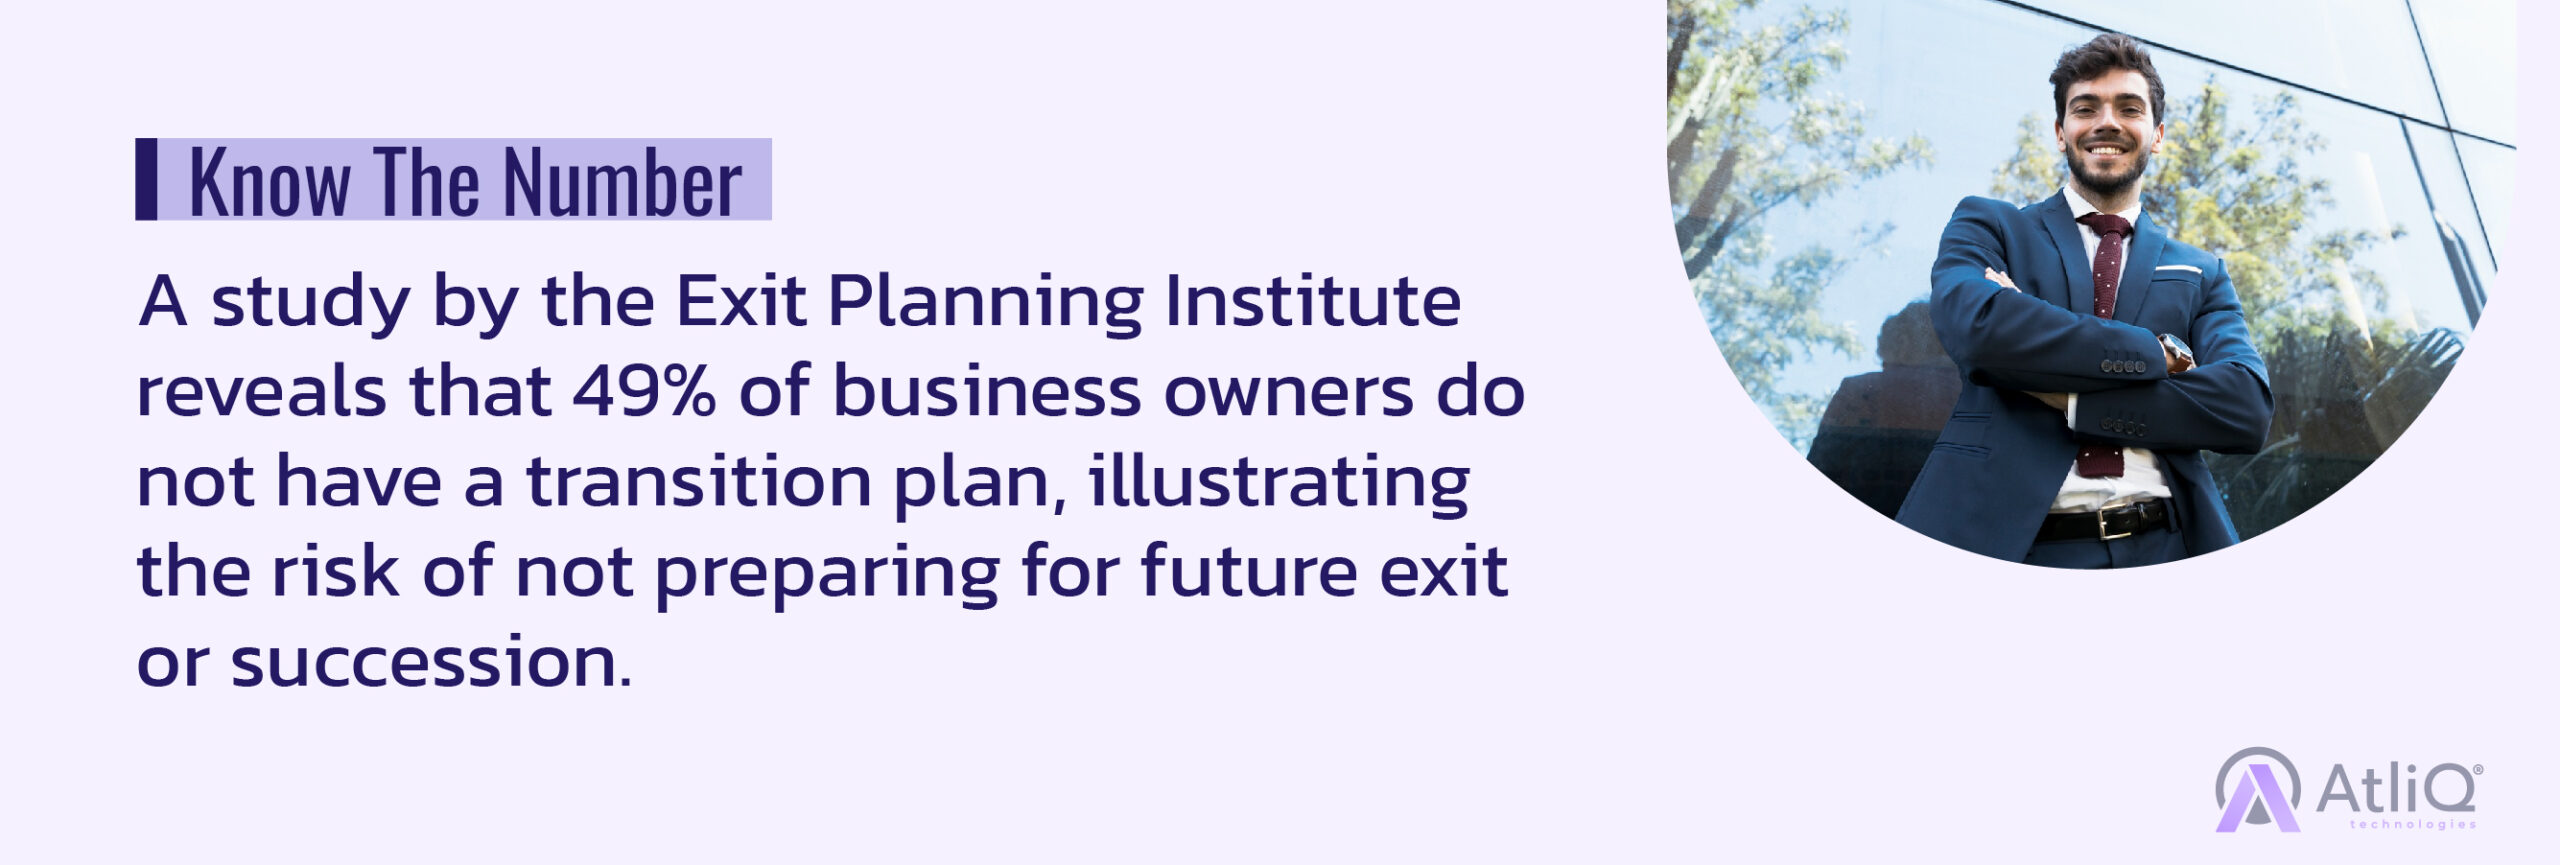 study by the Exit Planning Institute reveals